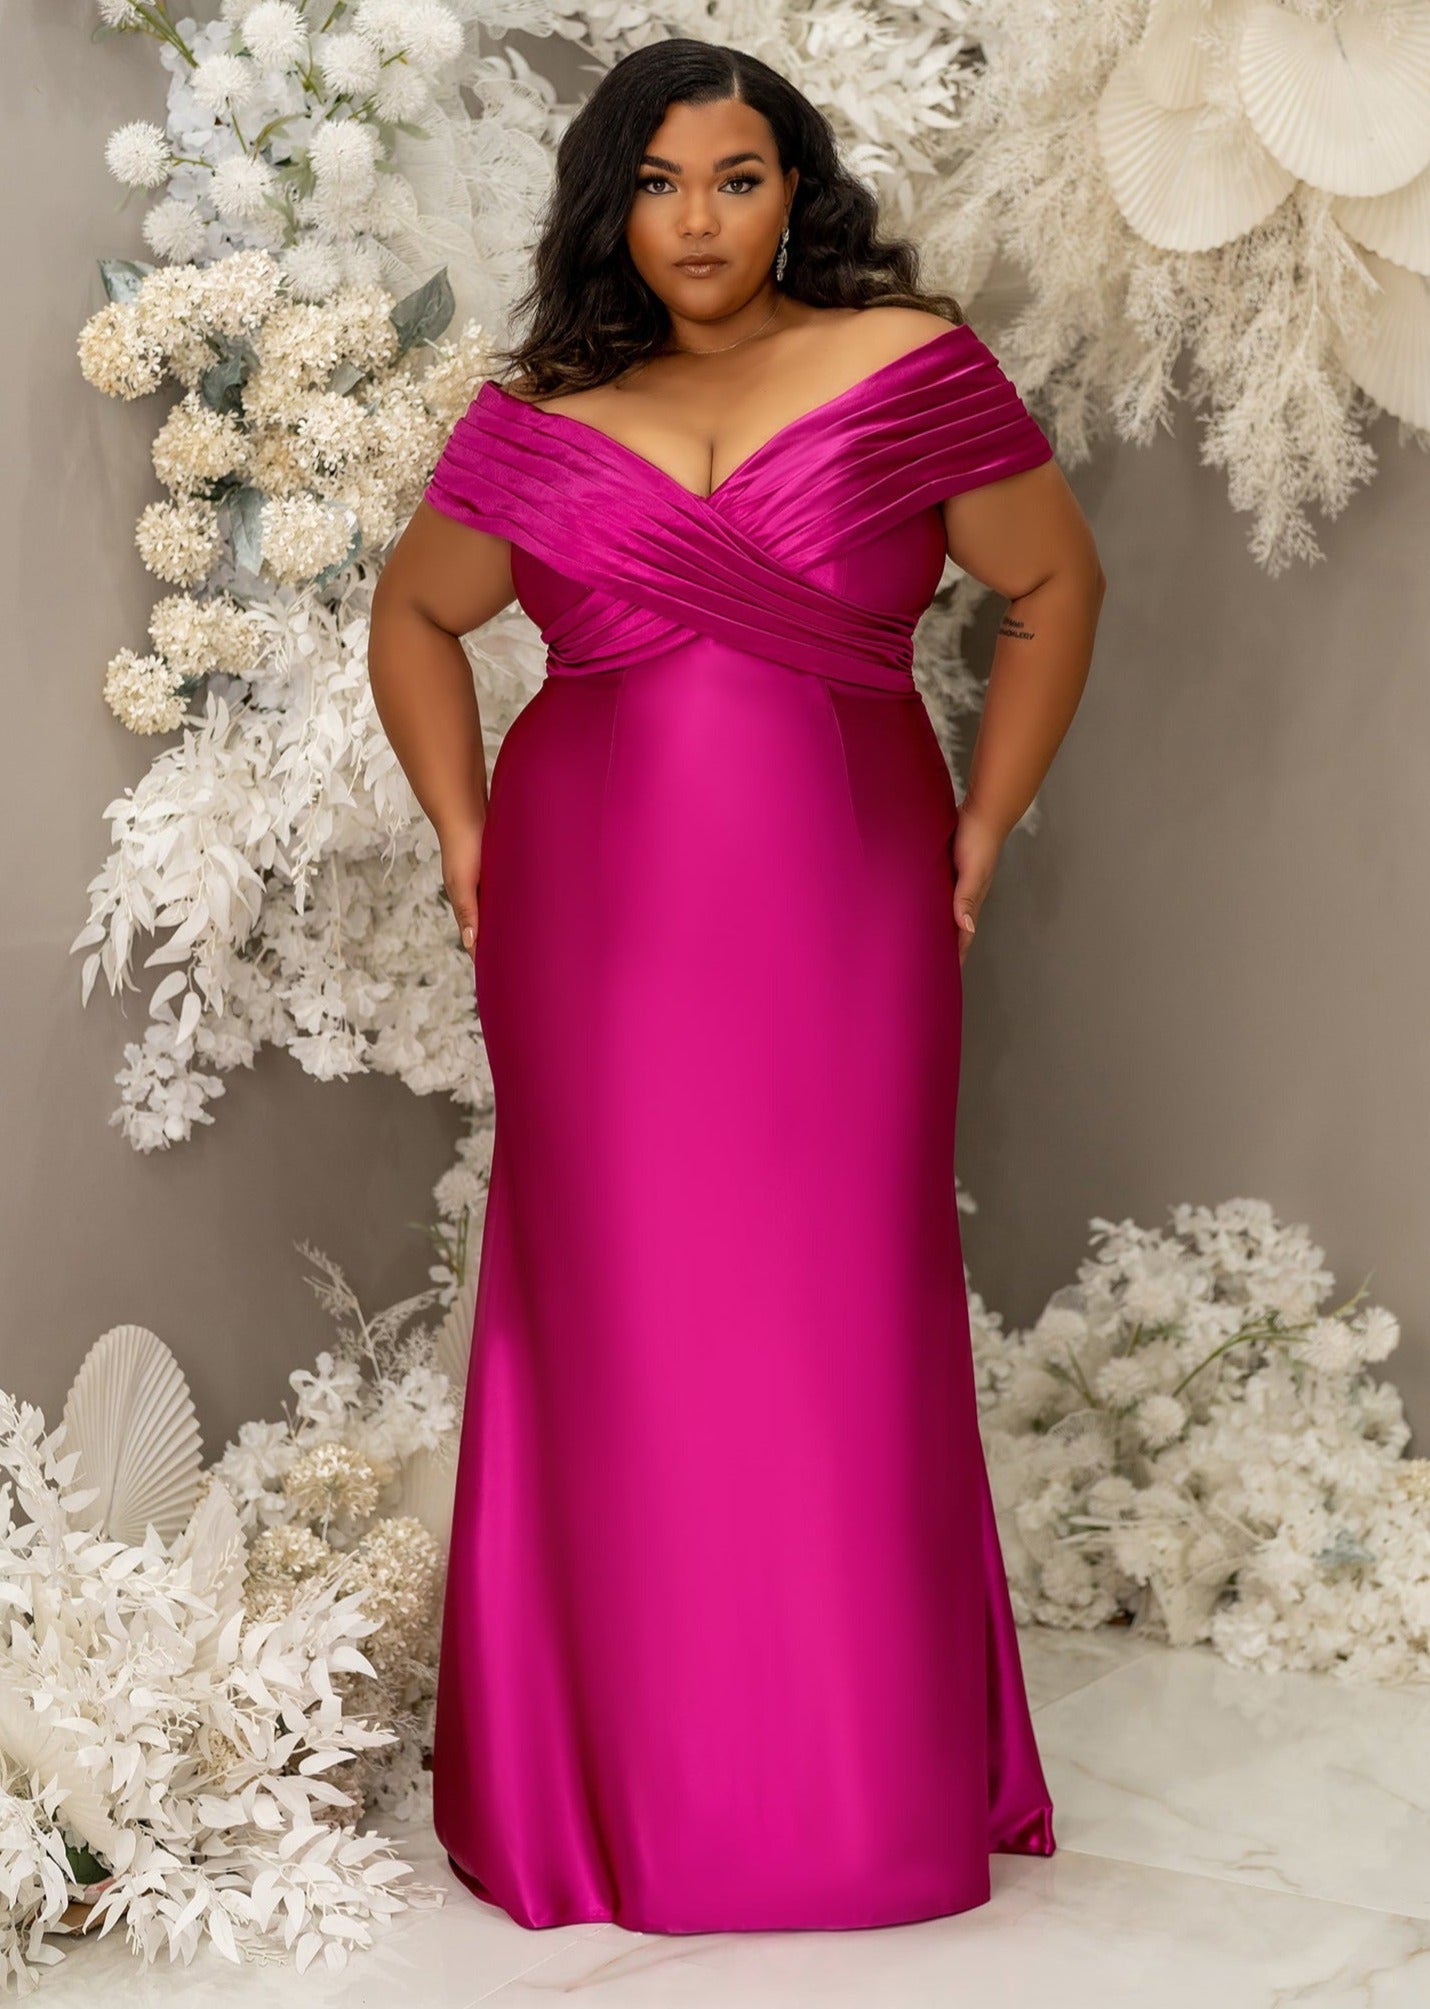 Plus size curvy black bridesmaid wearing a column off the shoulder bridesmaid dress with crisscross pleating and stretch to flaunt curves